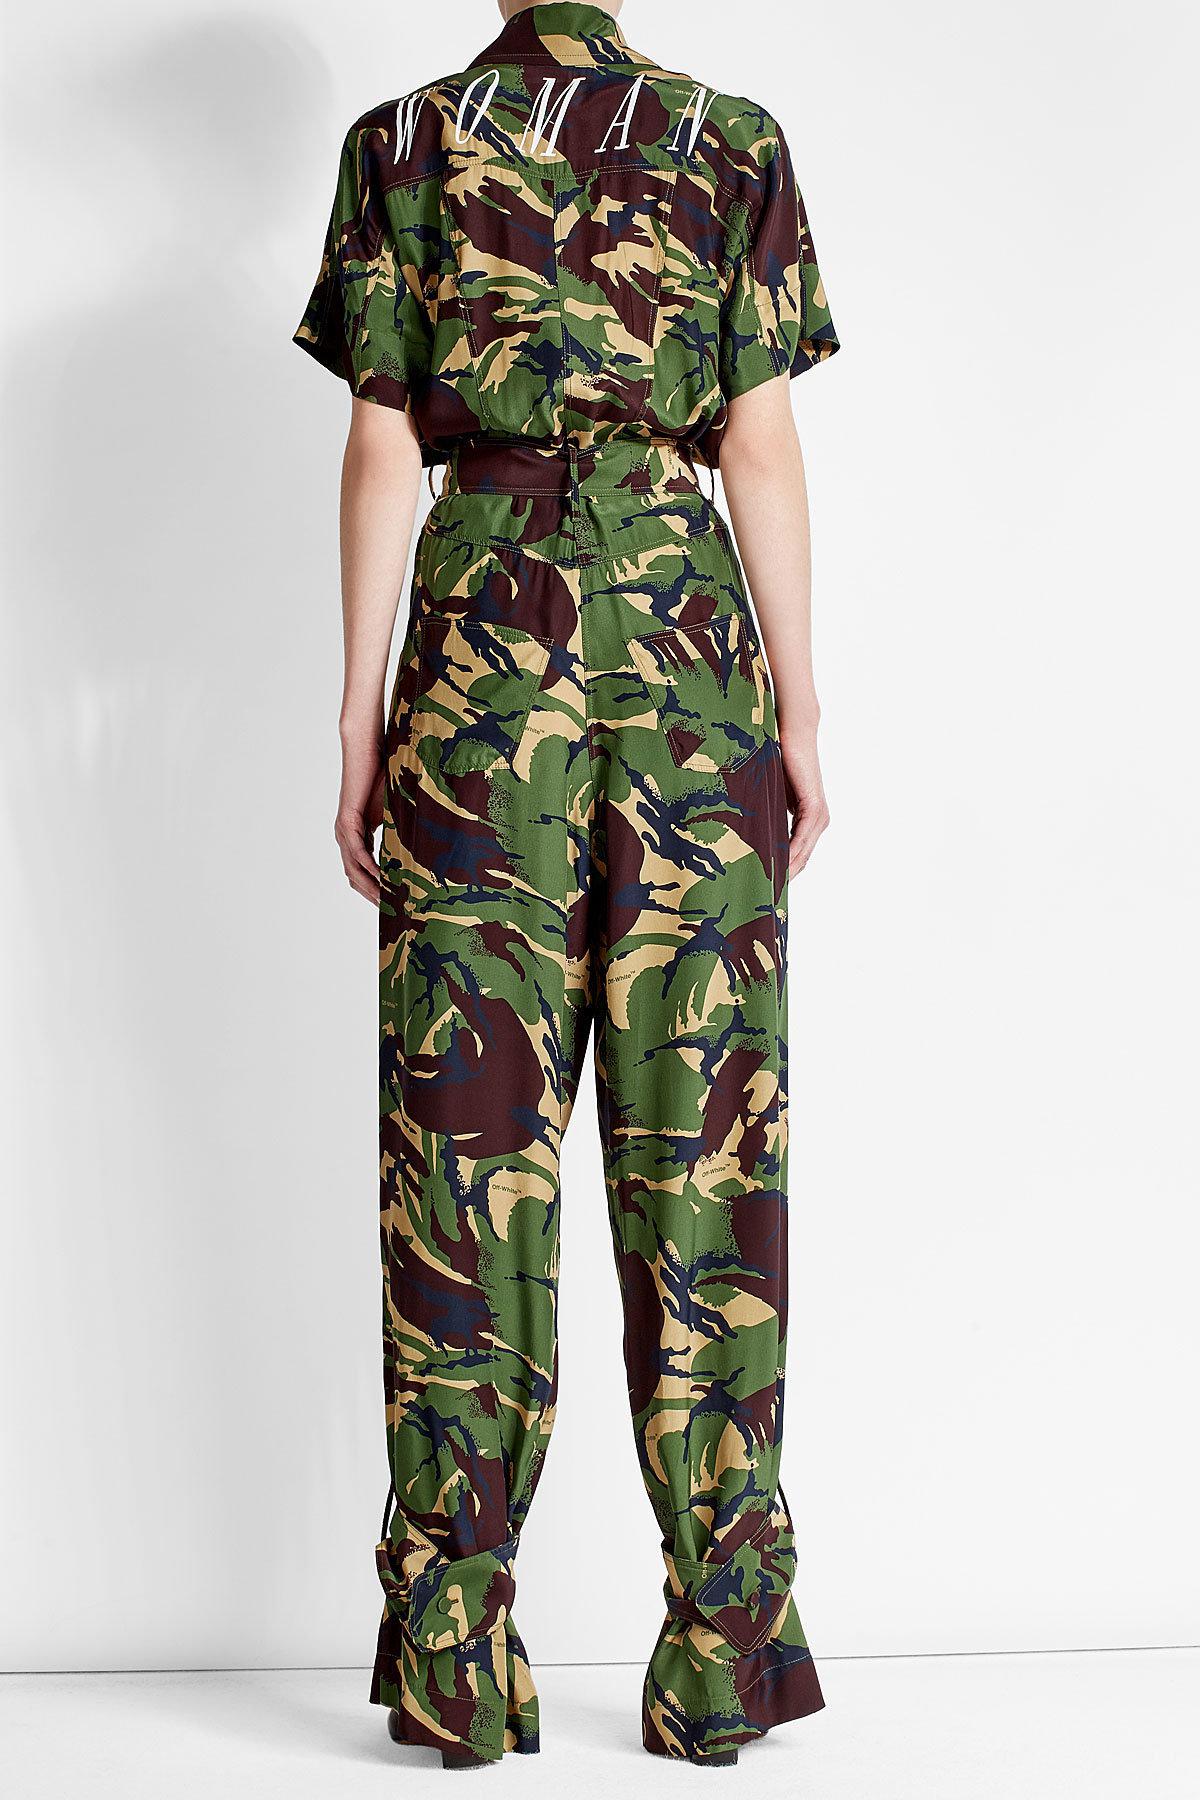 Lyst - Off-White C/O Virgil Abloh Camouflage Silk Jumpsuit in Green